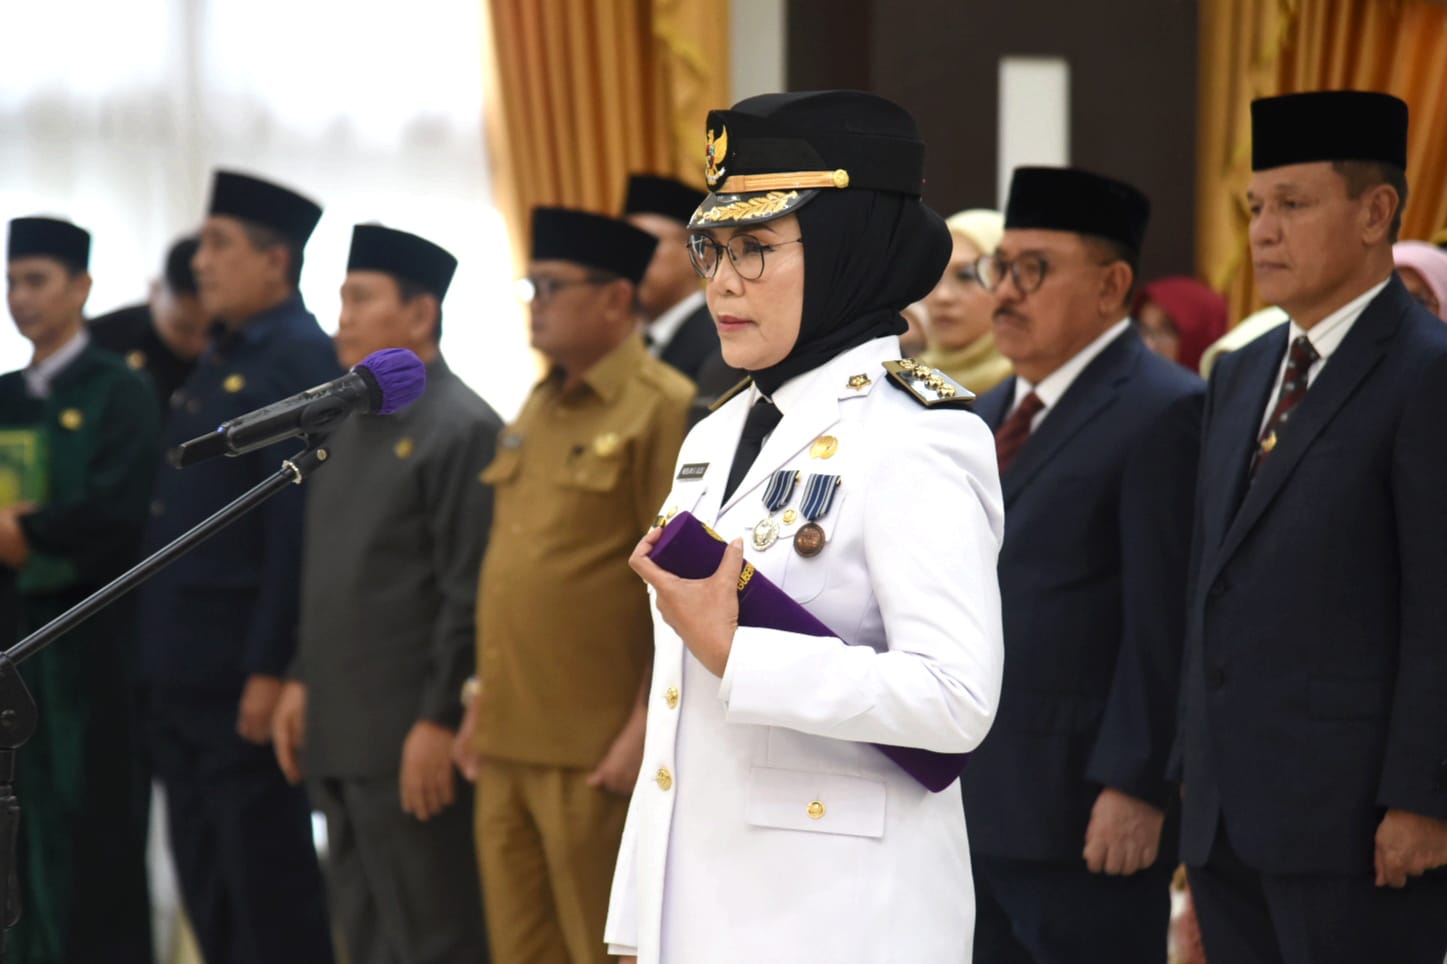  Today in a History, Merlan Uloli, First Female Regent in Gorontalo